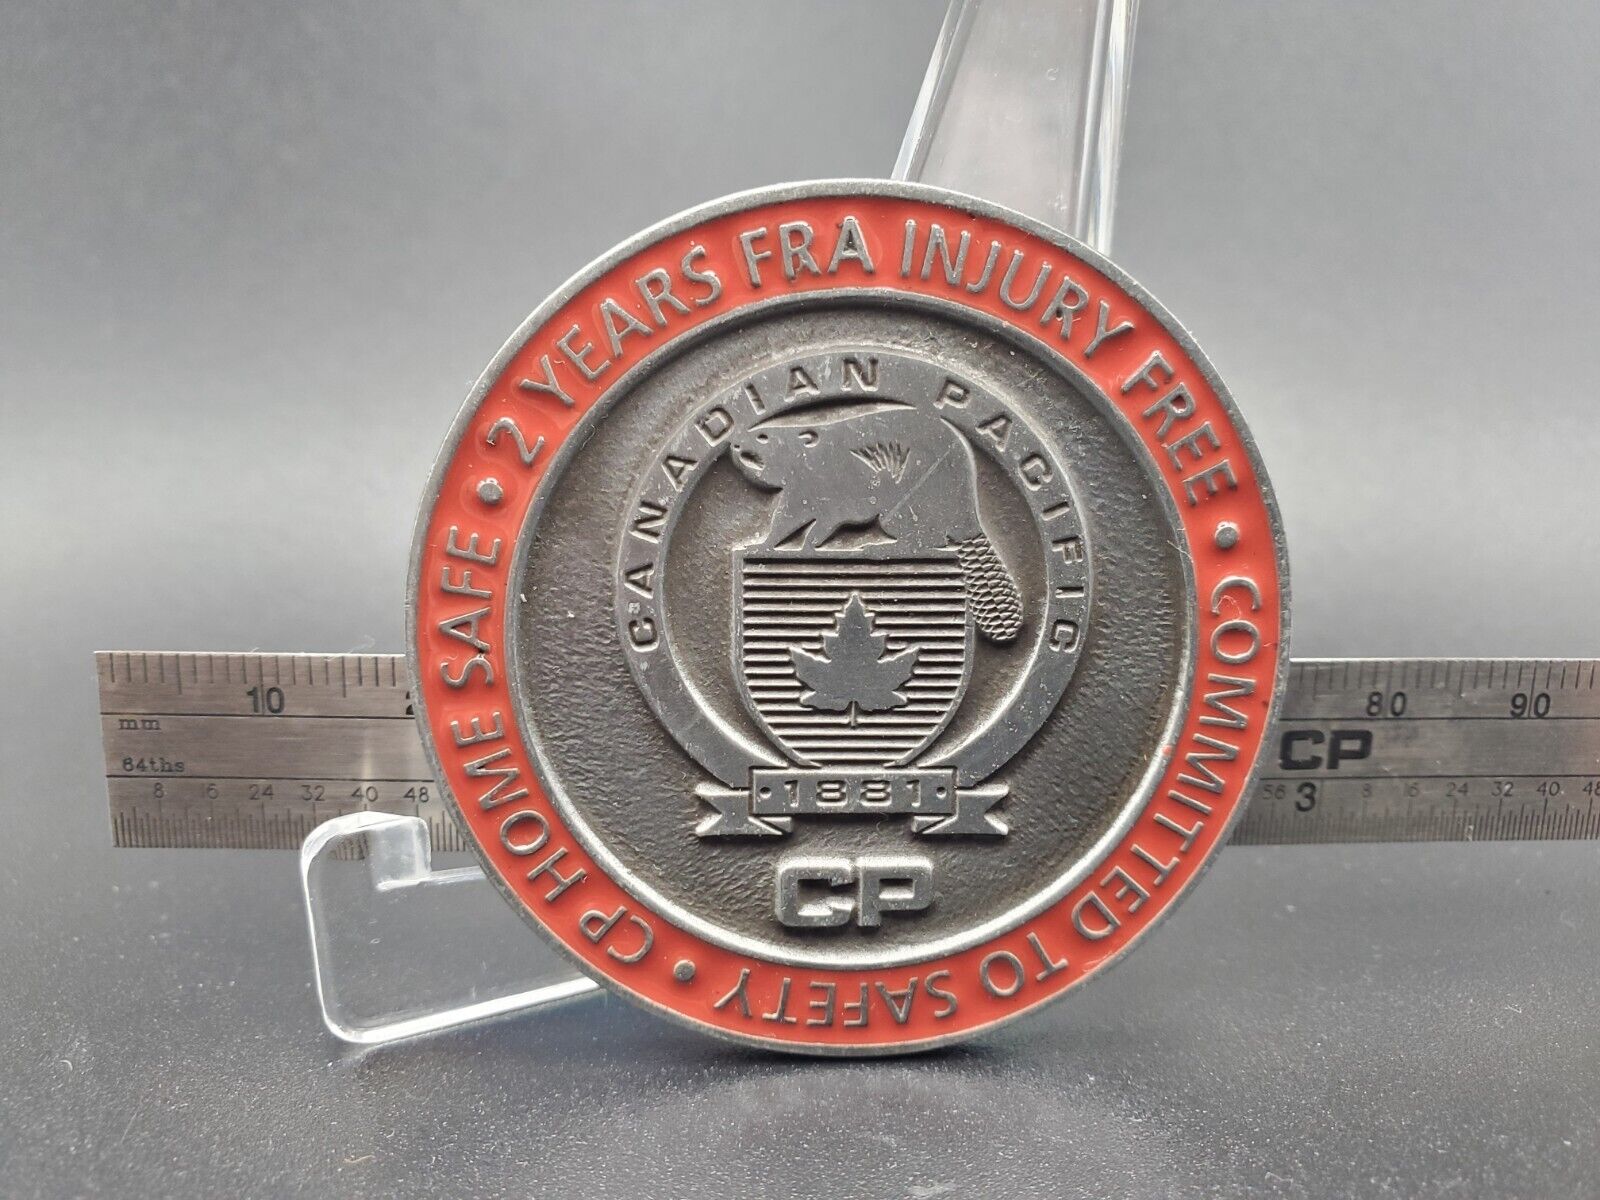 Canadian Pacific Railway CP Rail Coin 2 Years FRA Injury Free Awarded Toronto 